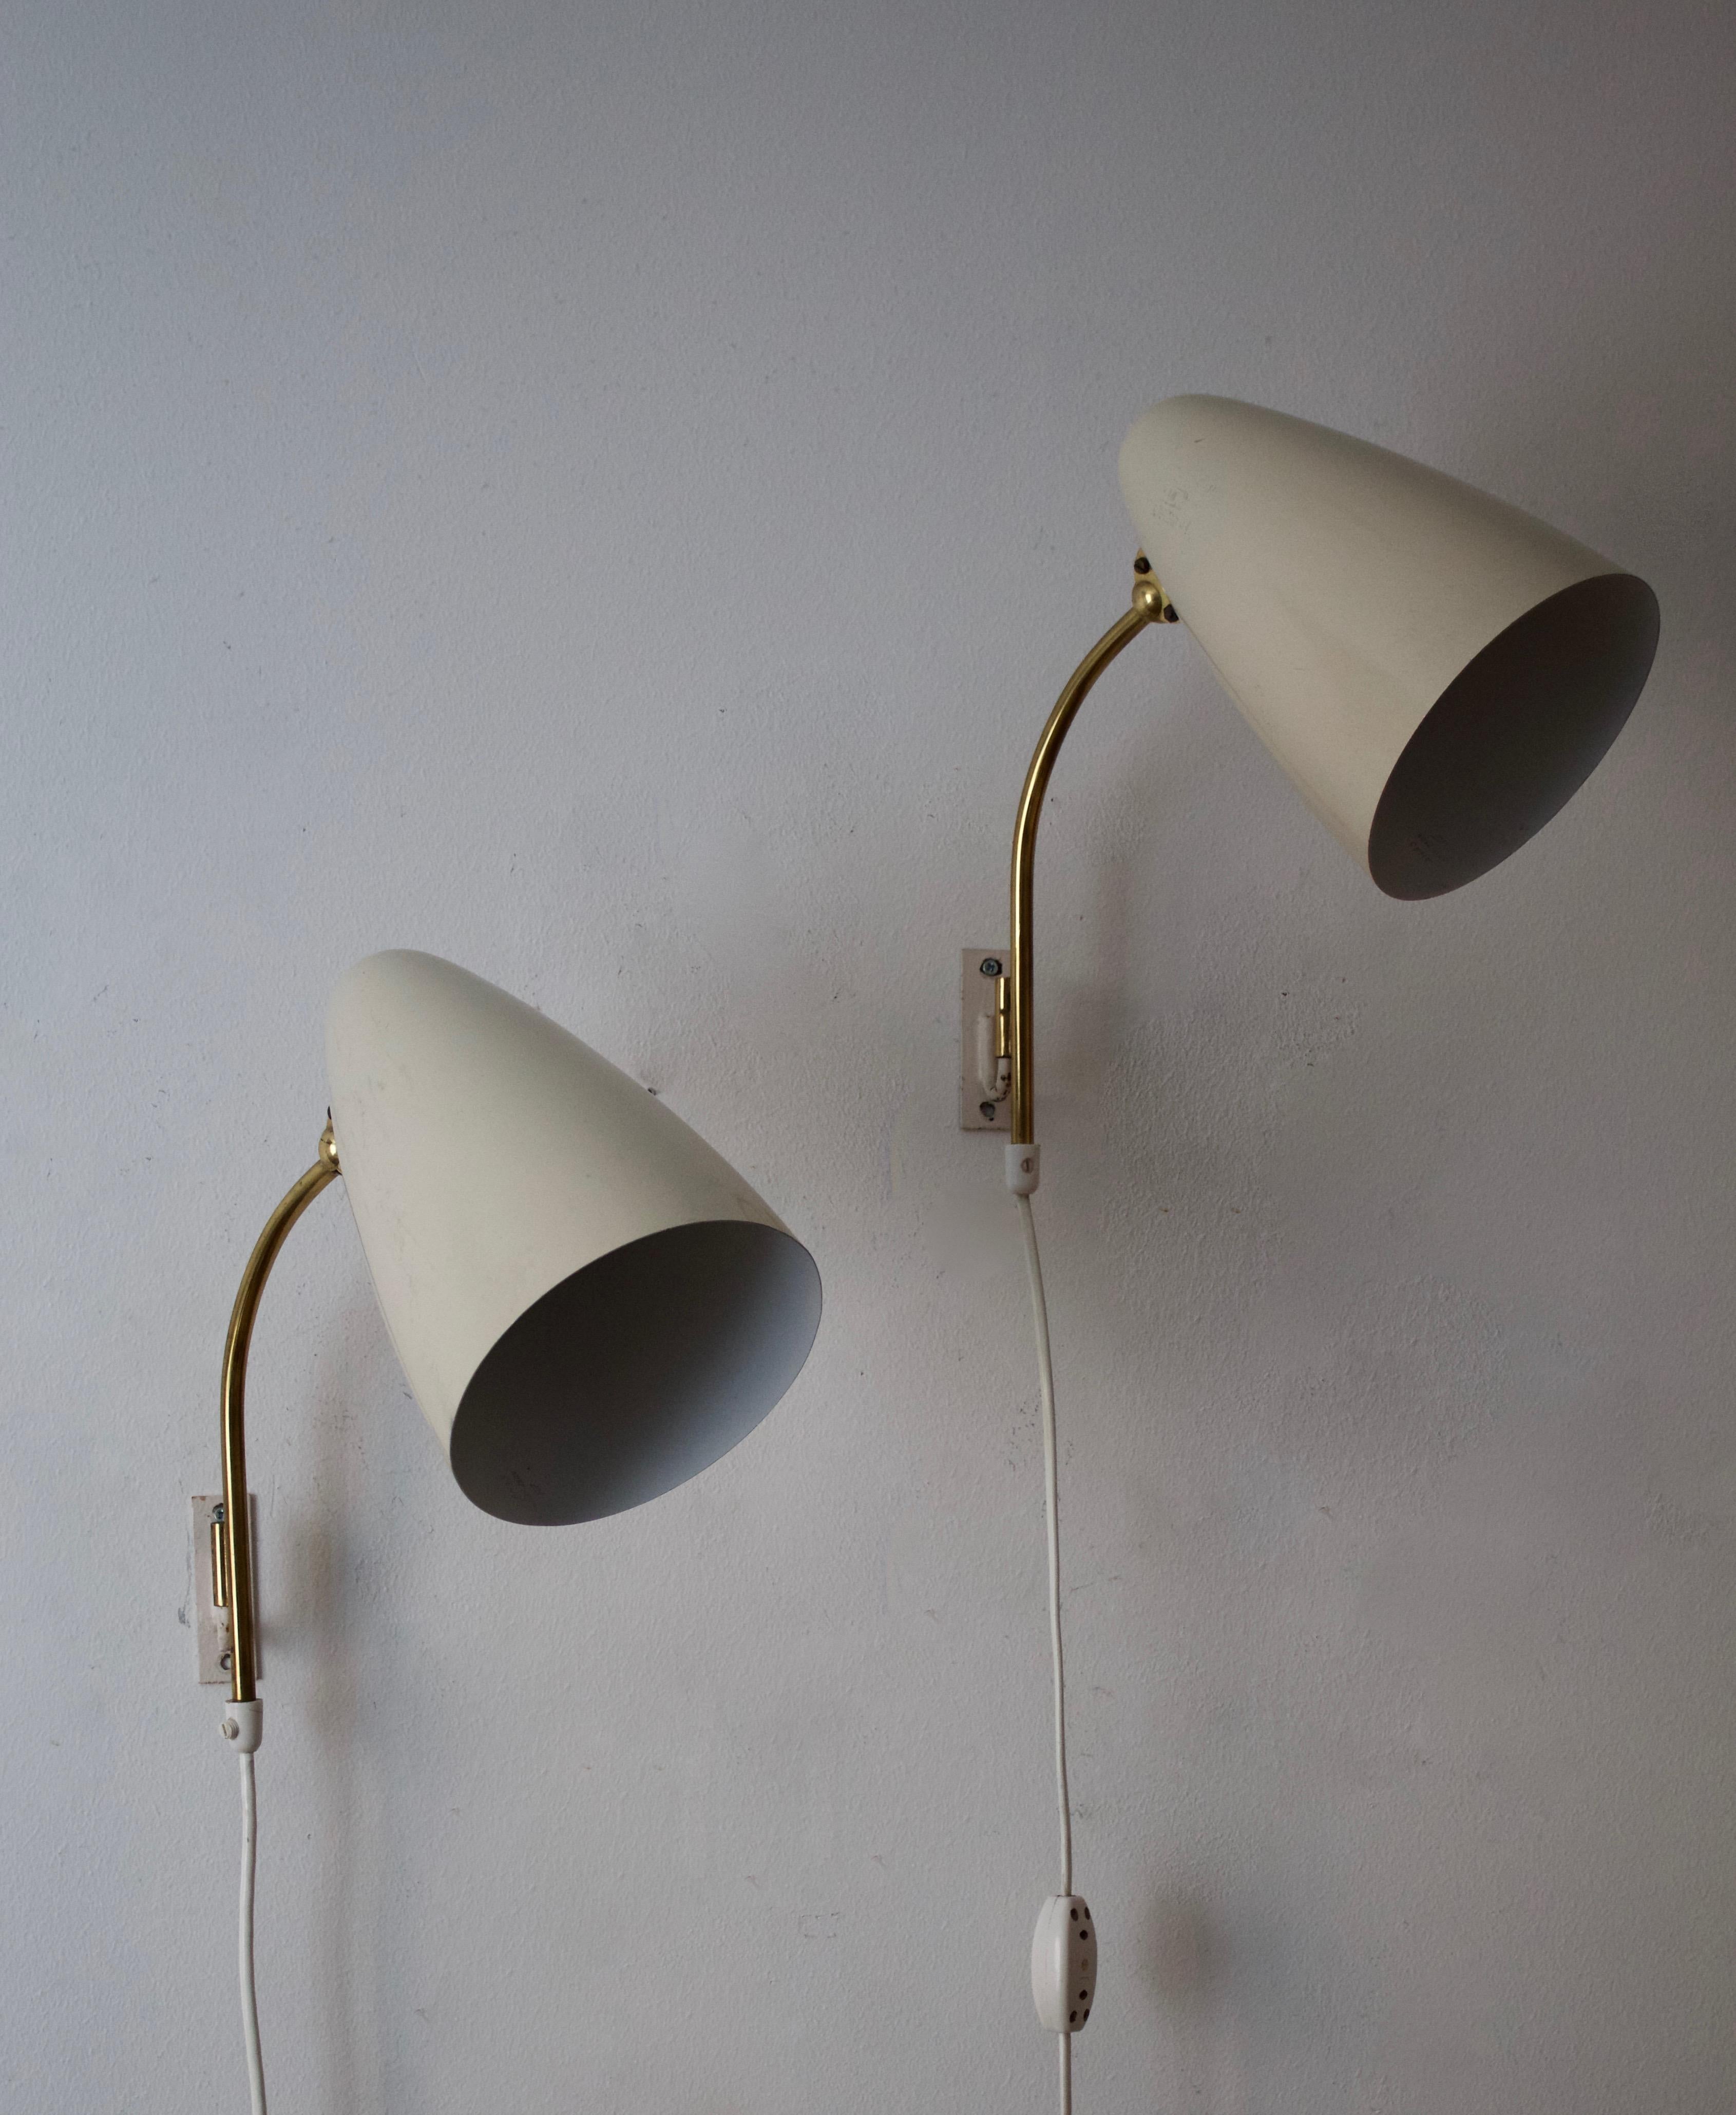 A desk / table lamp by Finnish producer Itsu. Marked. In brass and lacquered metal.

Other notable lighting designers of the 20th century include Paavo Tynell, Alvar Aalto, Lisa Johansson-Pape, Angelo Lelii, Max Ingrand and Gino Sarfatti.